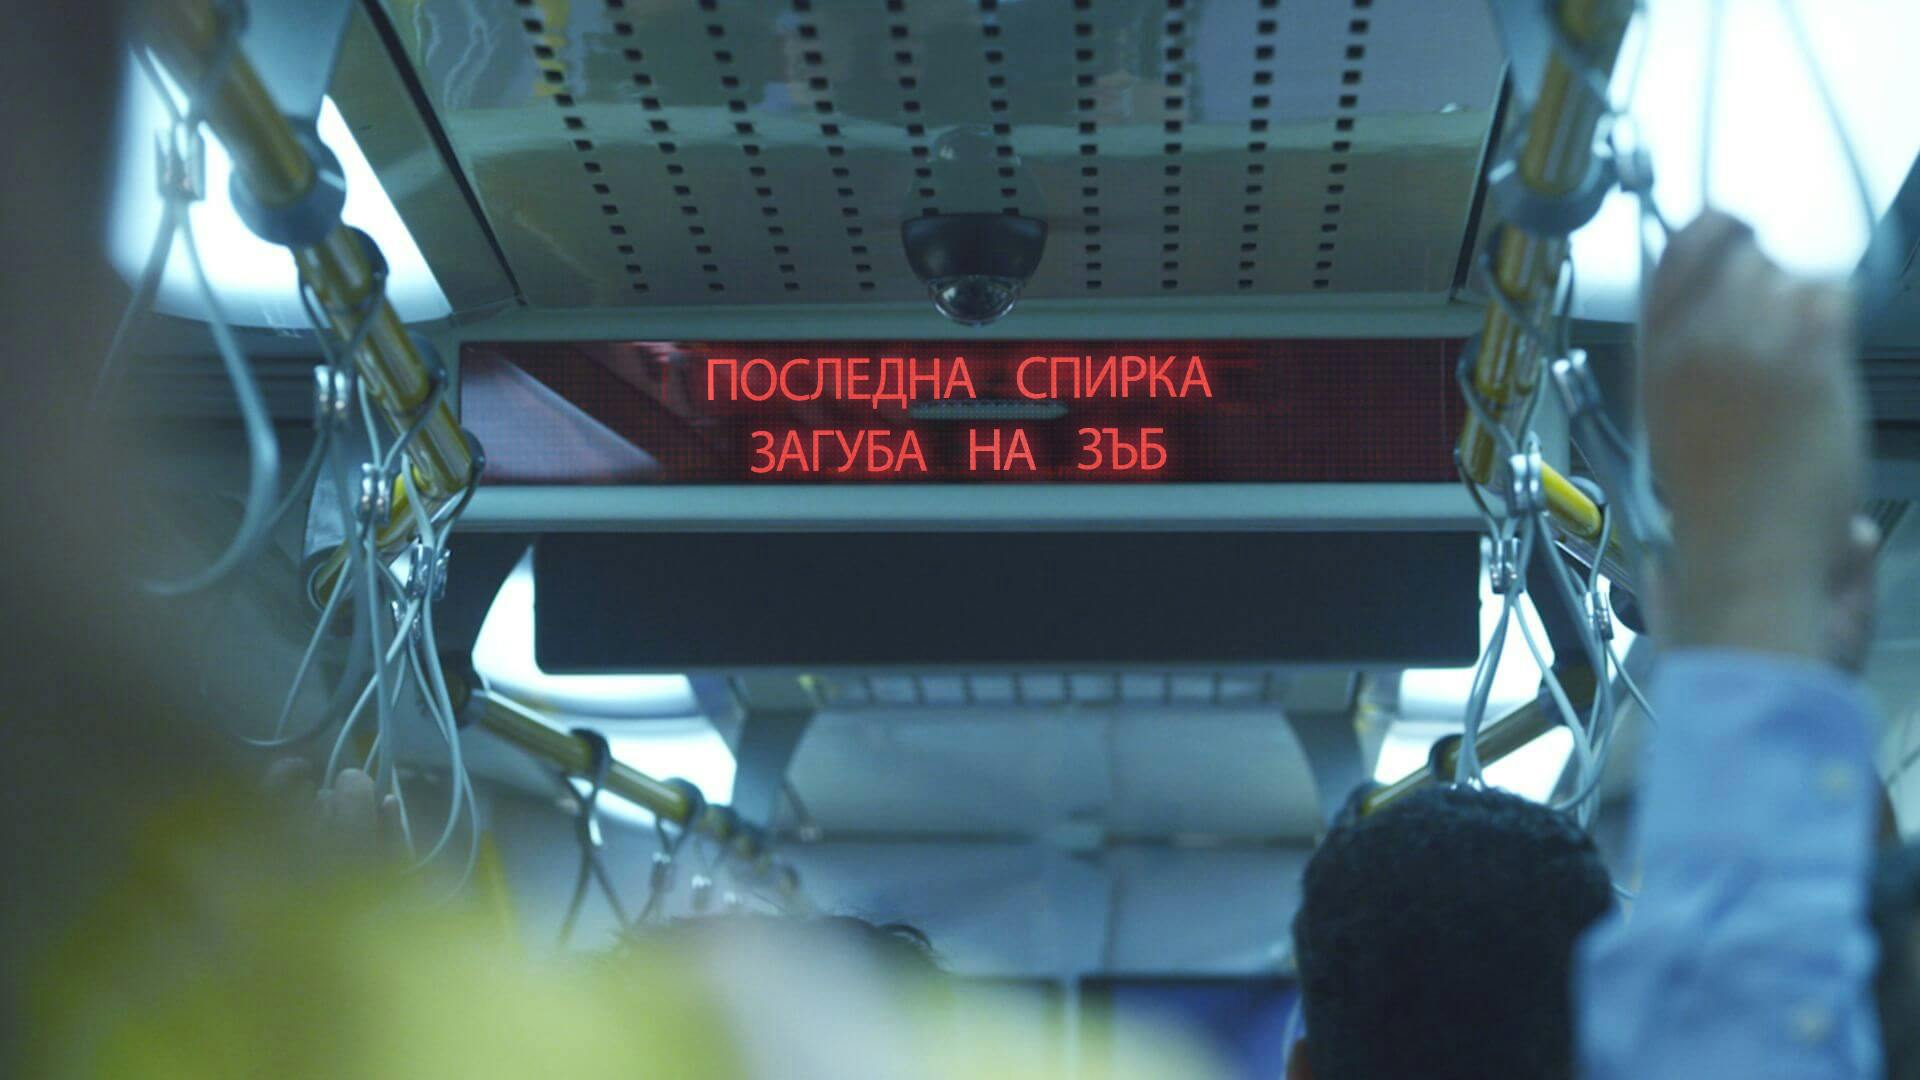 Sign inside a train that says Final destination: tooth loss